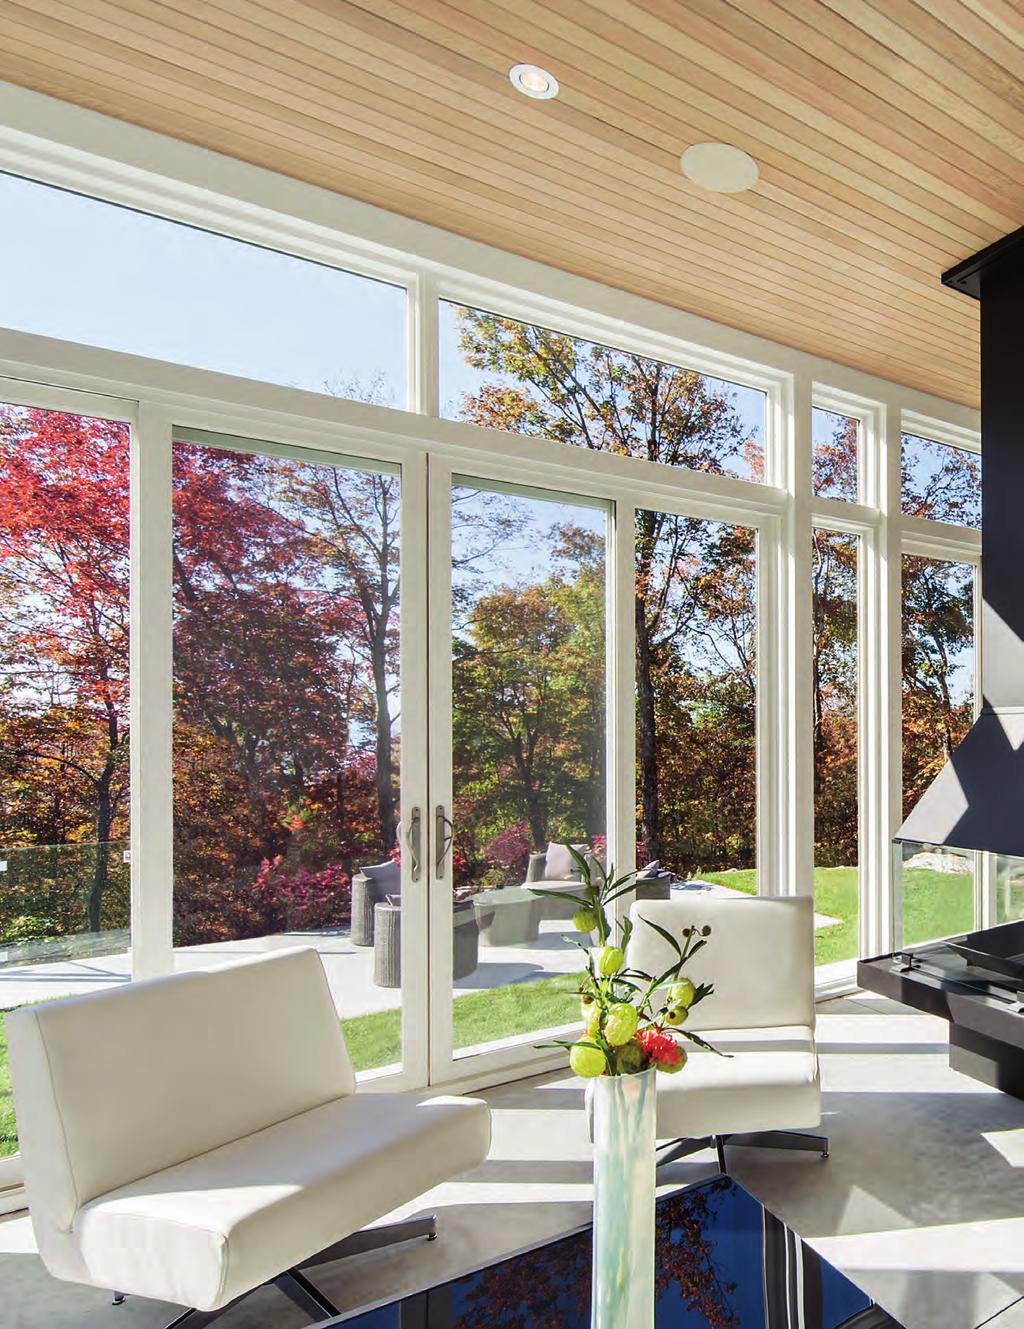 42 SLIDING PATIO DOORS The Marvin Sliding Patio Door is a sophisticated, contemporary door created for smooth operation and dependable performance.